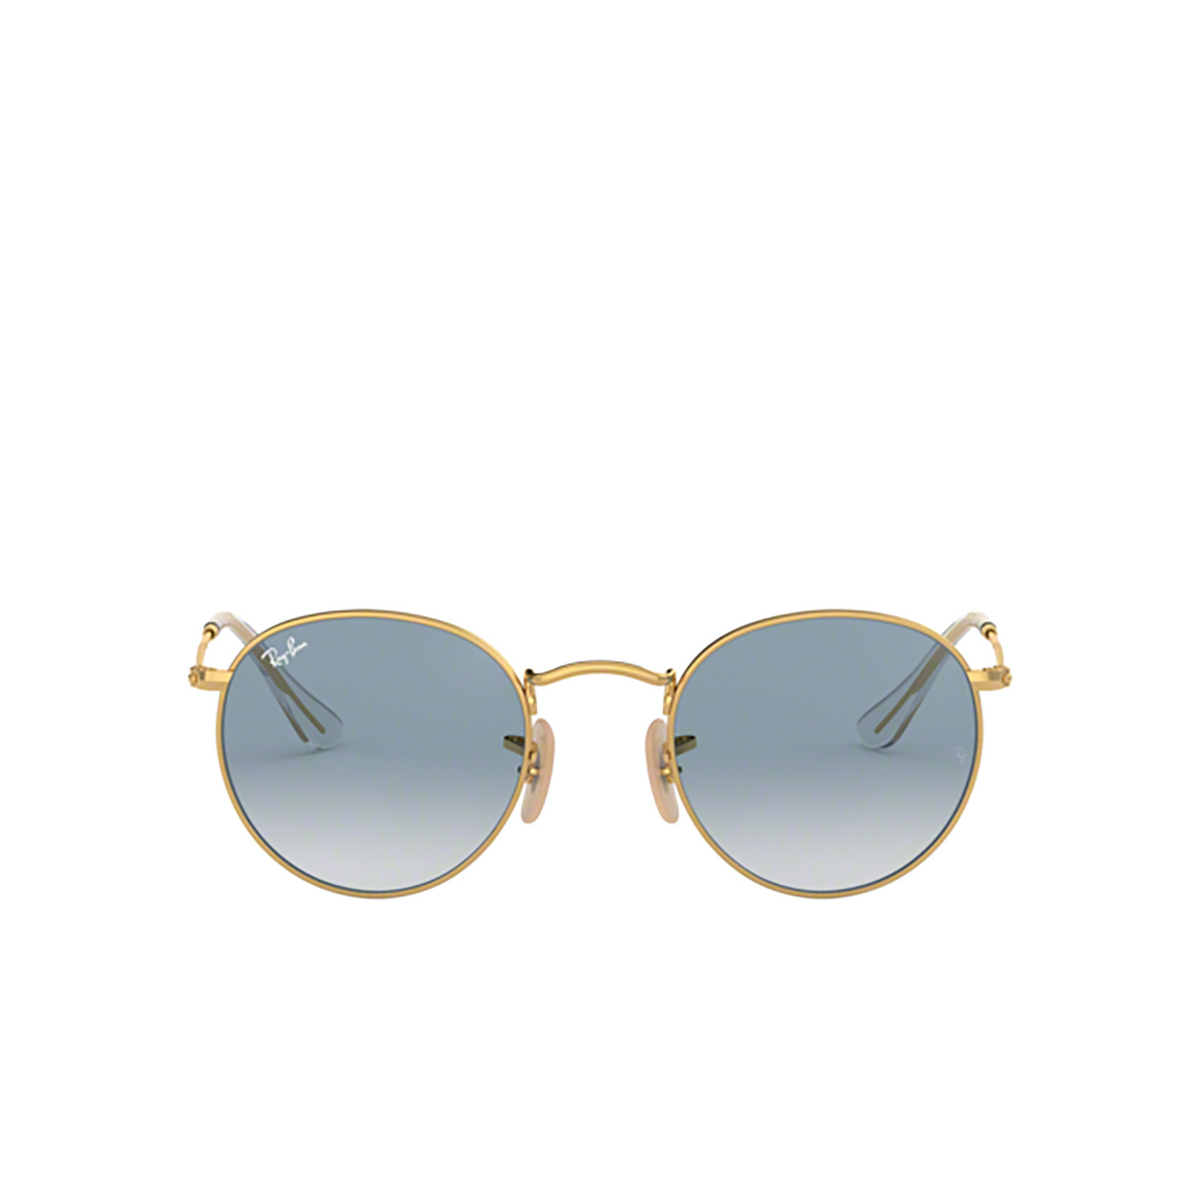 Ray-Ban ROUND METAL Sunglasses 001/3F Arista - front view